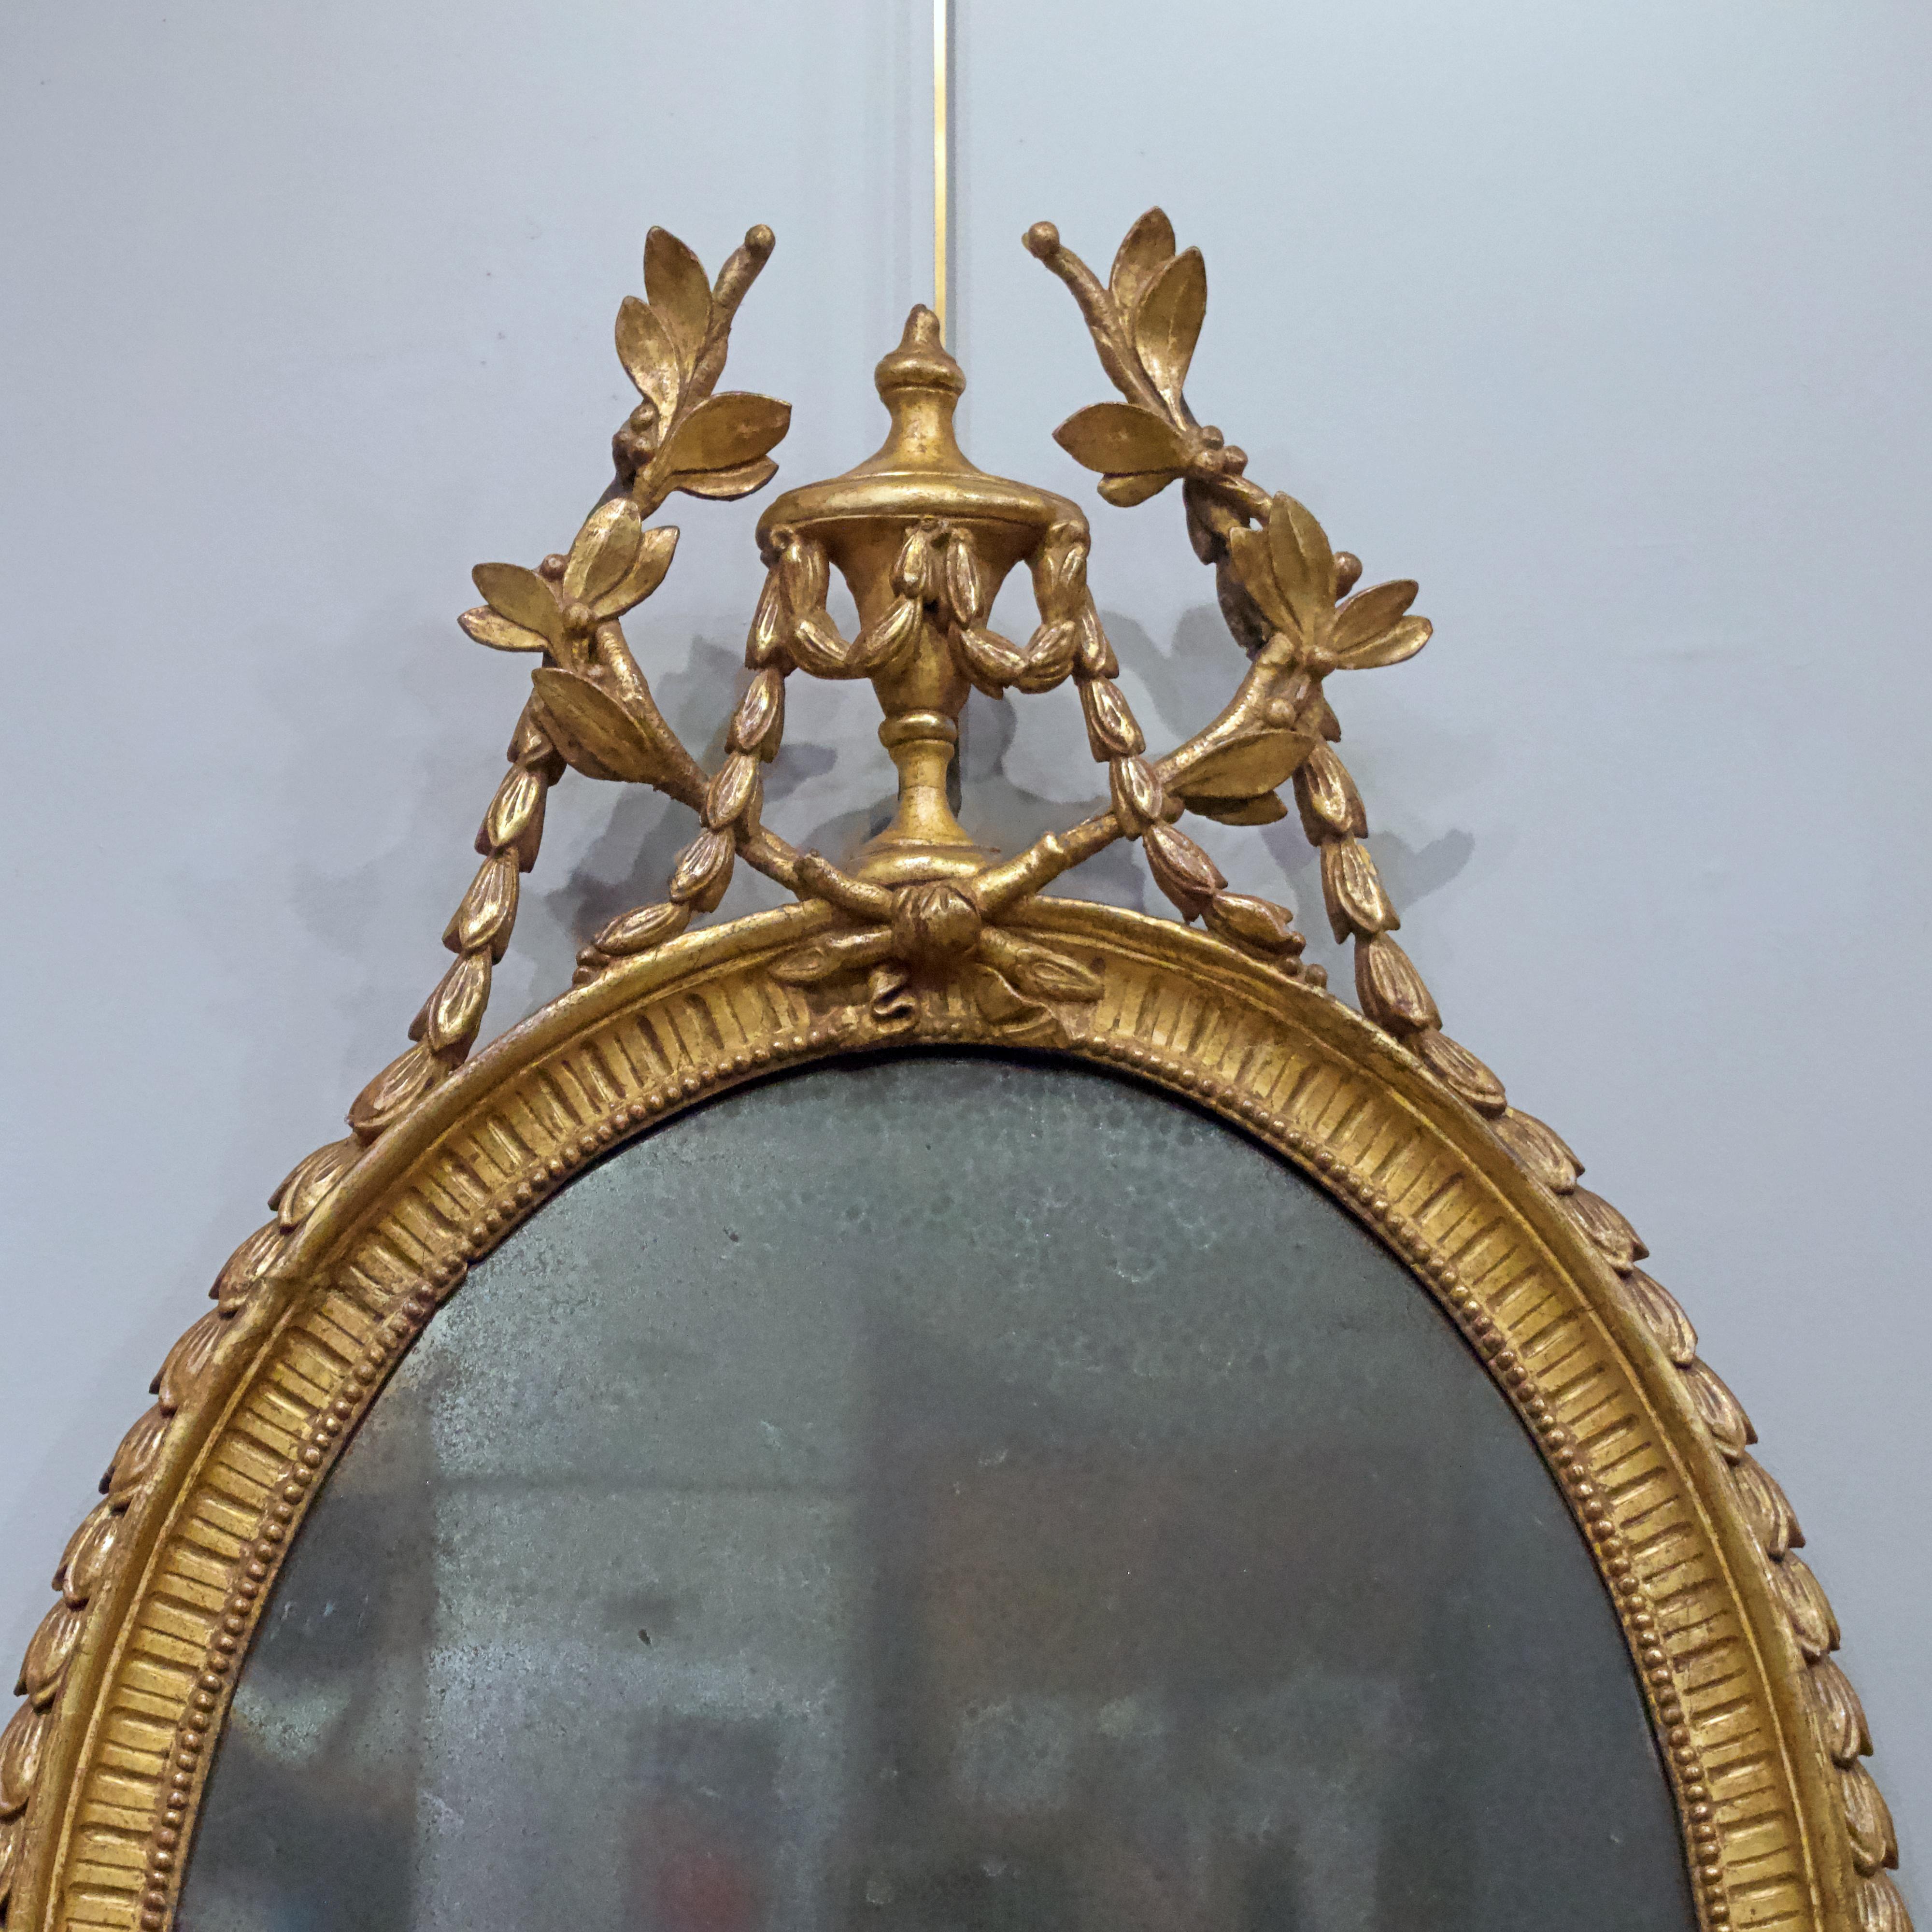 A George III oval giltwood mirror, late 18th century
 
The urn shaped finial centered on foliate swags
the oval frame with carved detail, over a central
Rosette patera, flanked with floral decoration.
With original mirror plate, heavily but